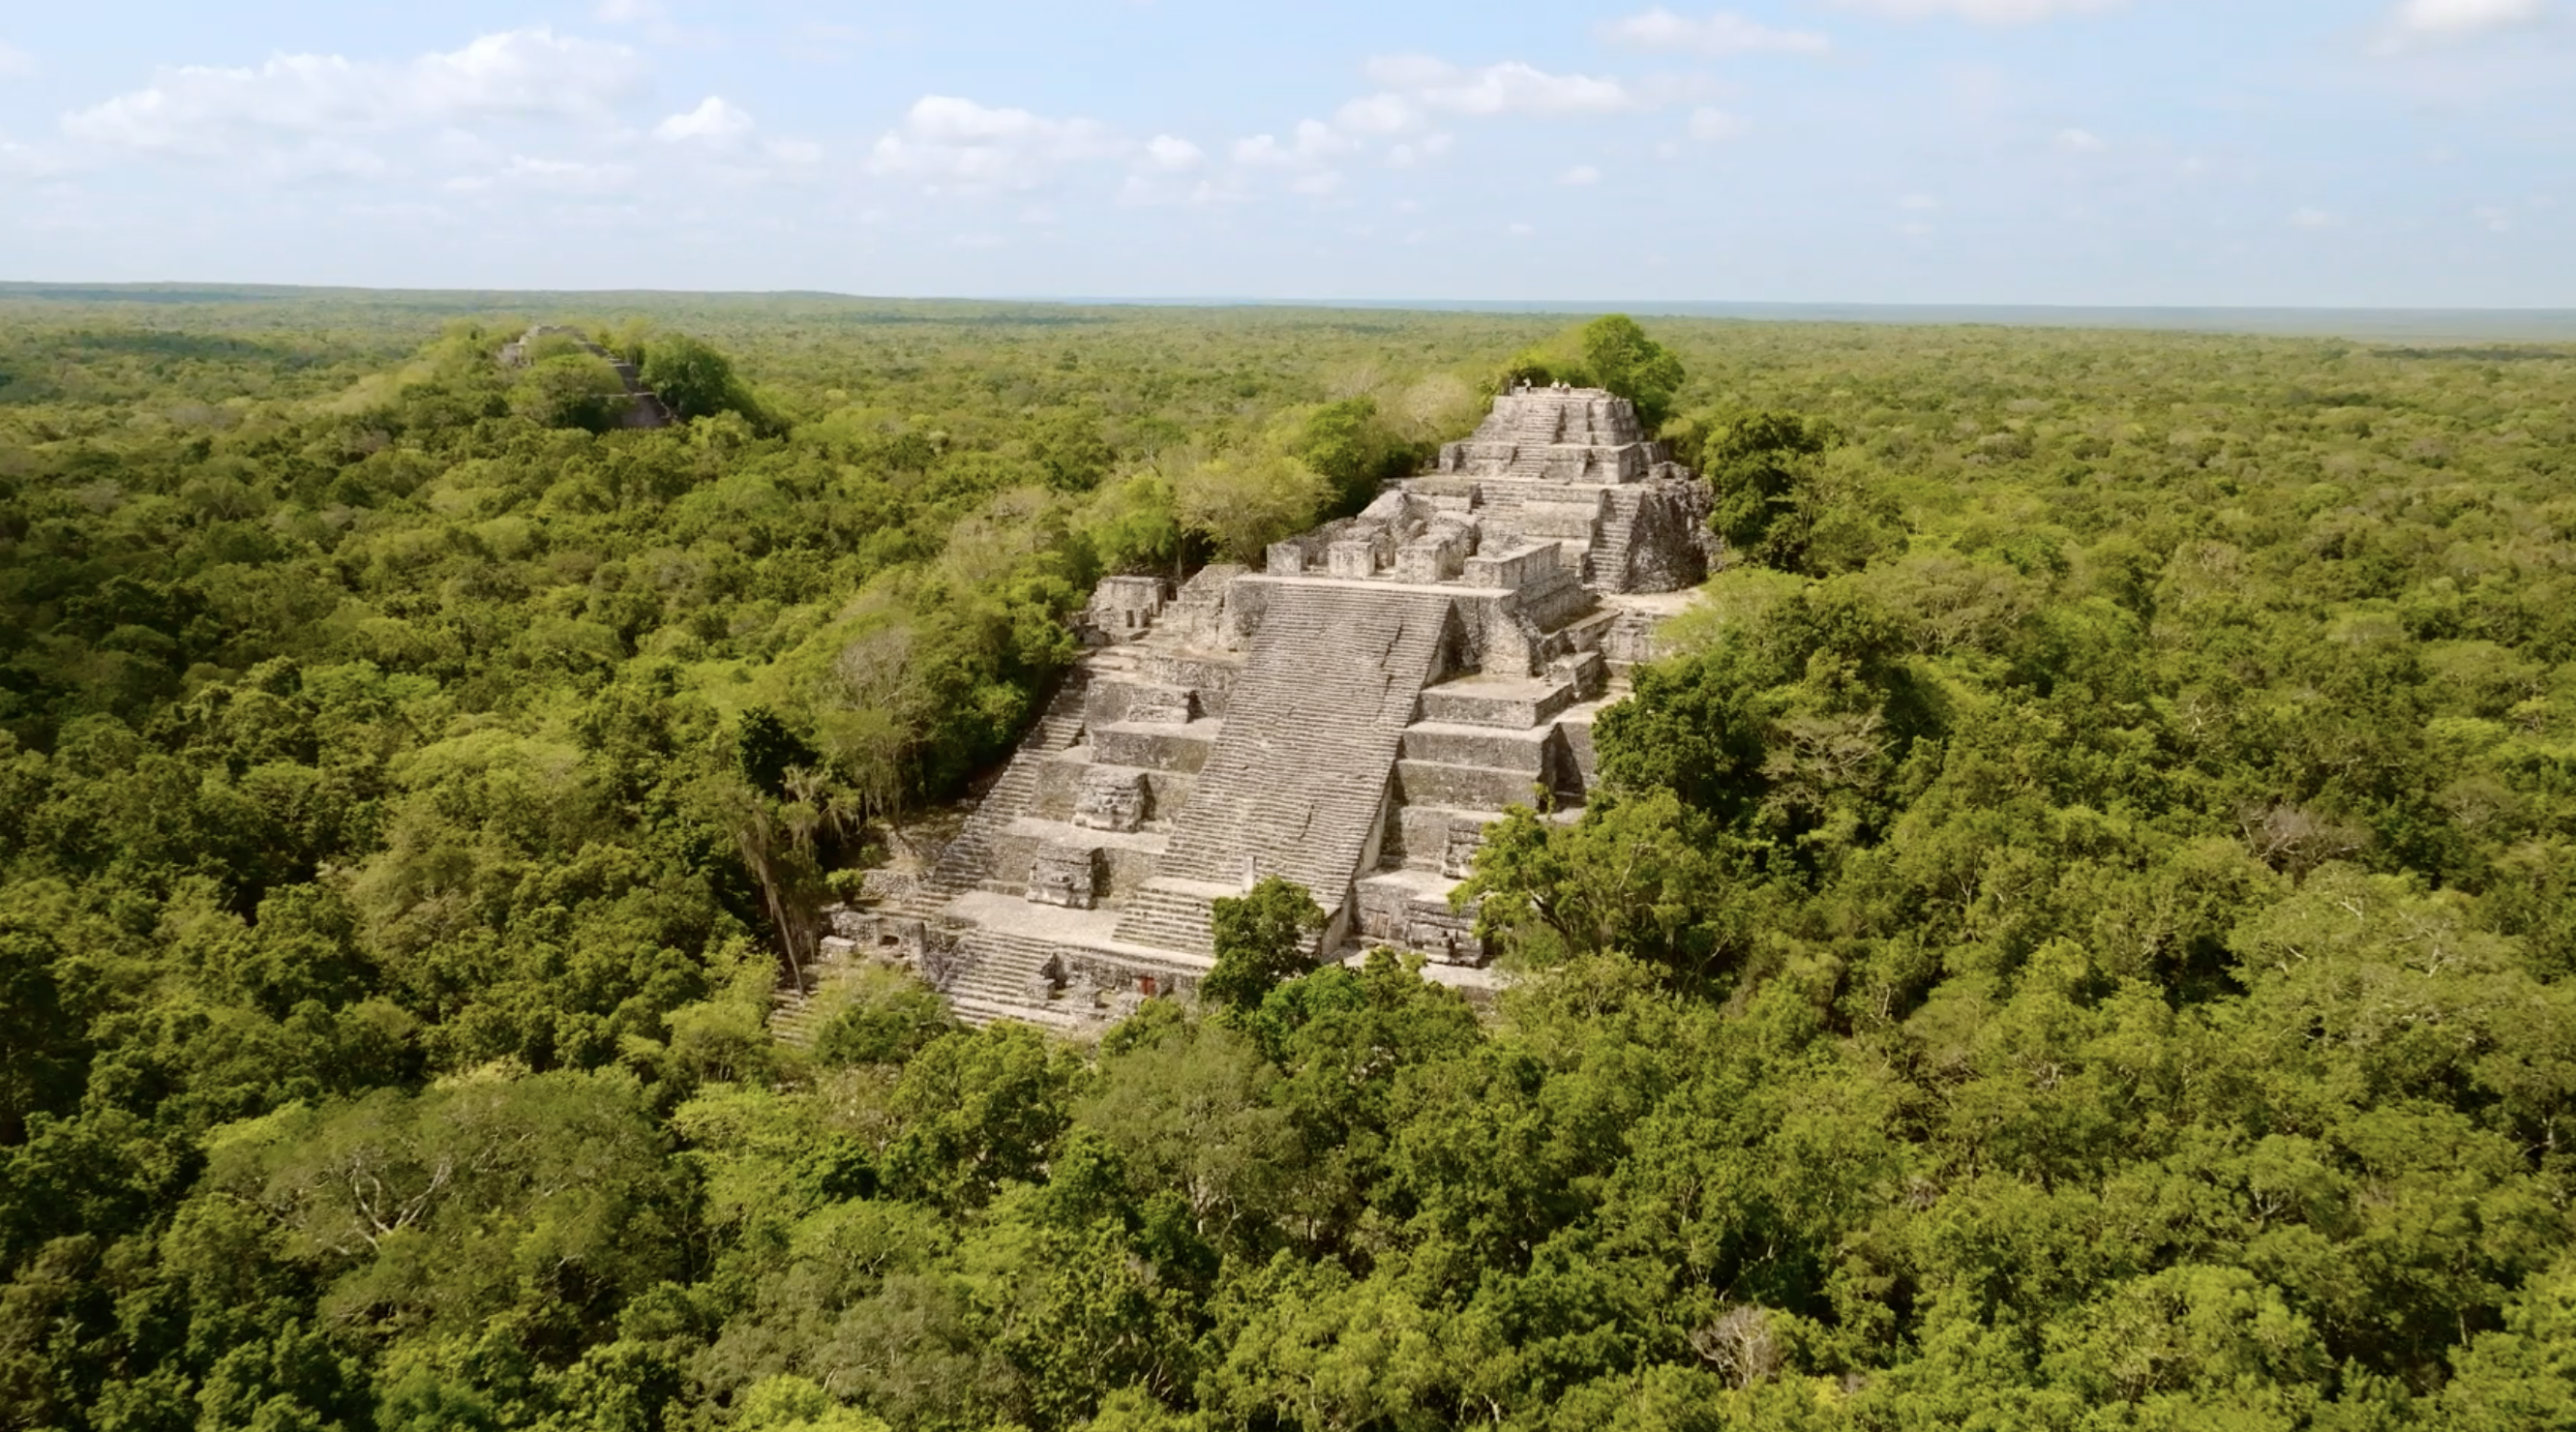 Rise and fall of the Mayas